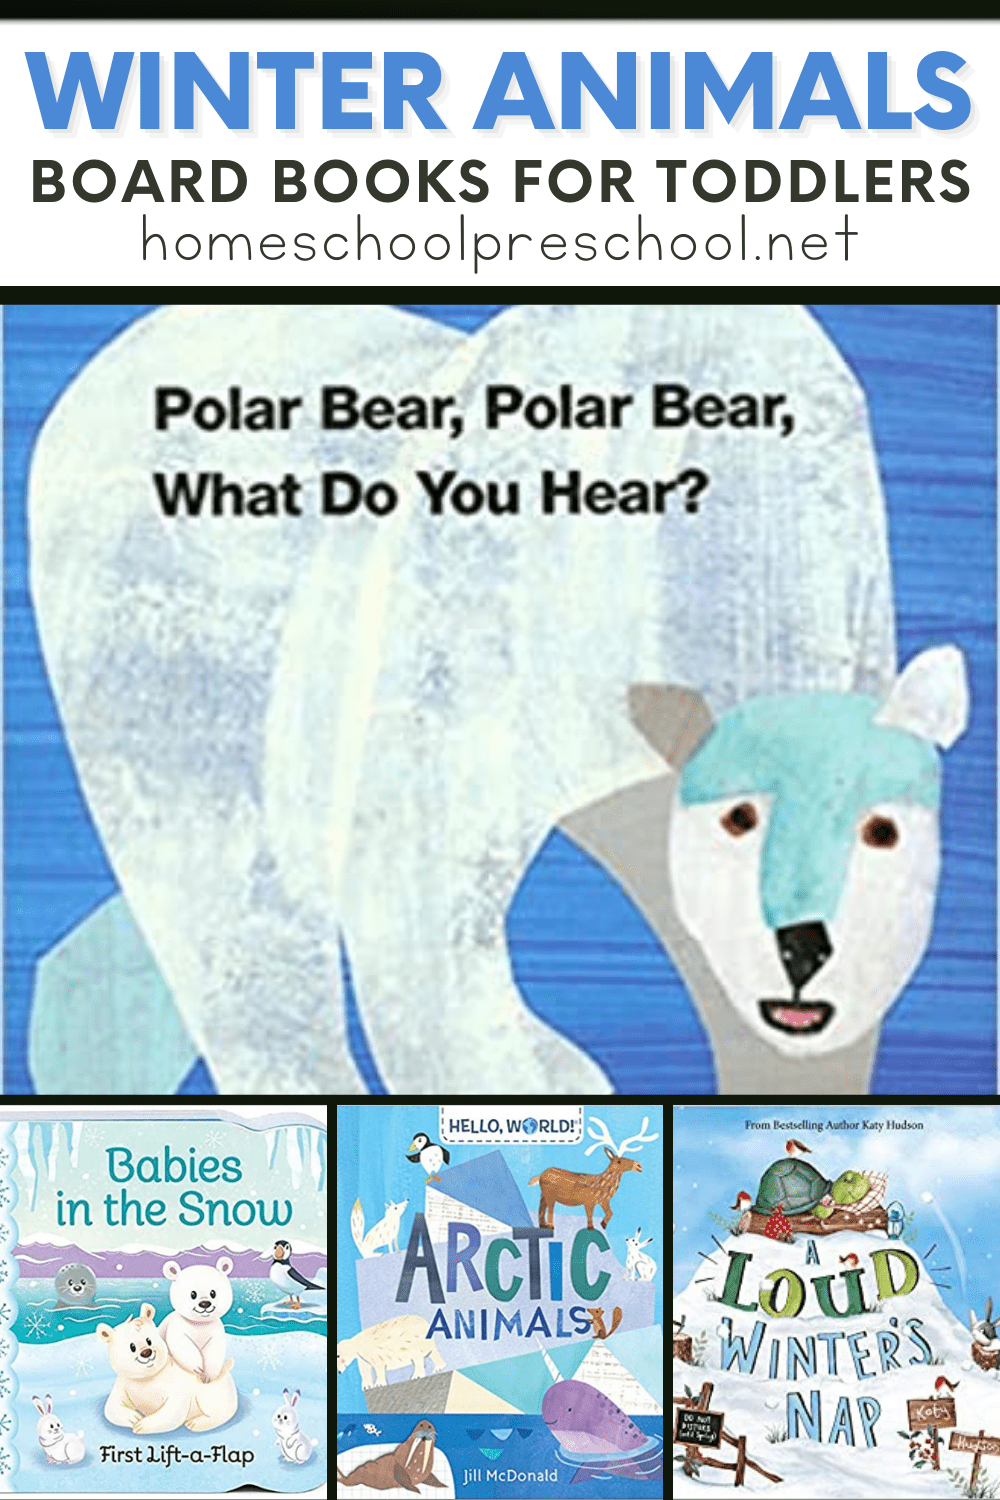 10 Winter Animals Books for Toddlers | Board Books